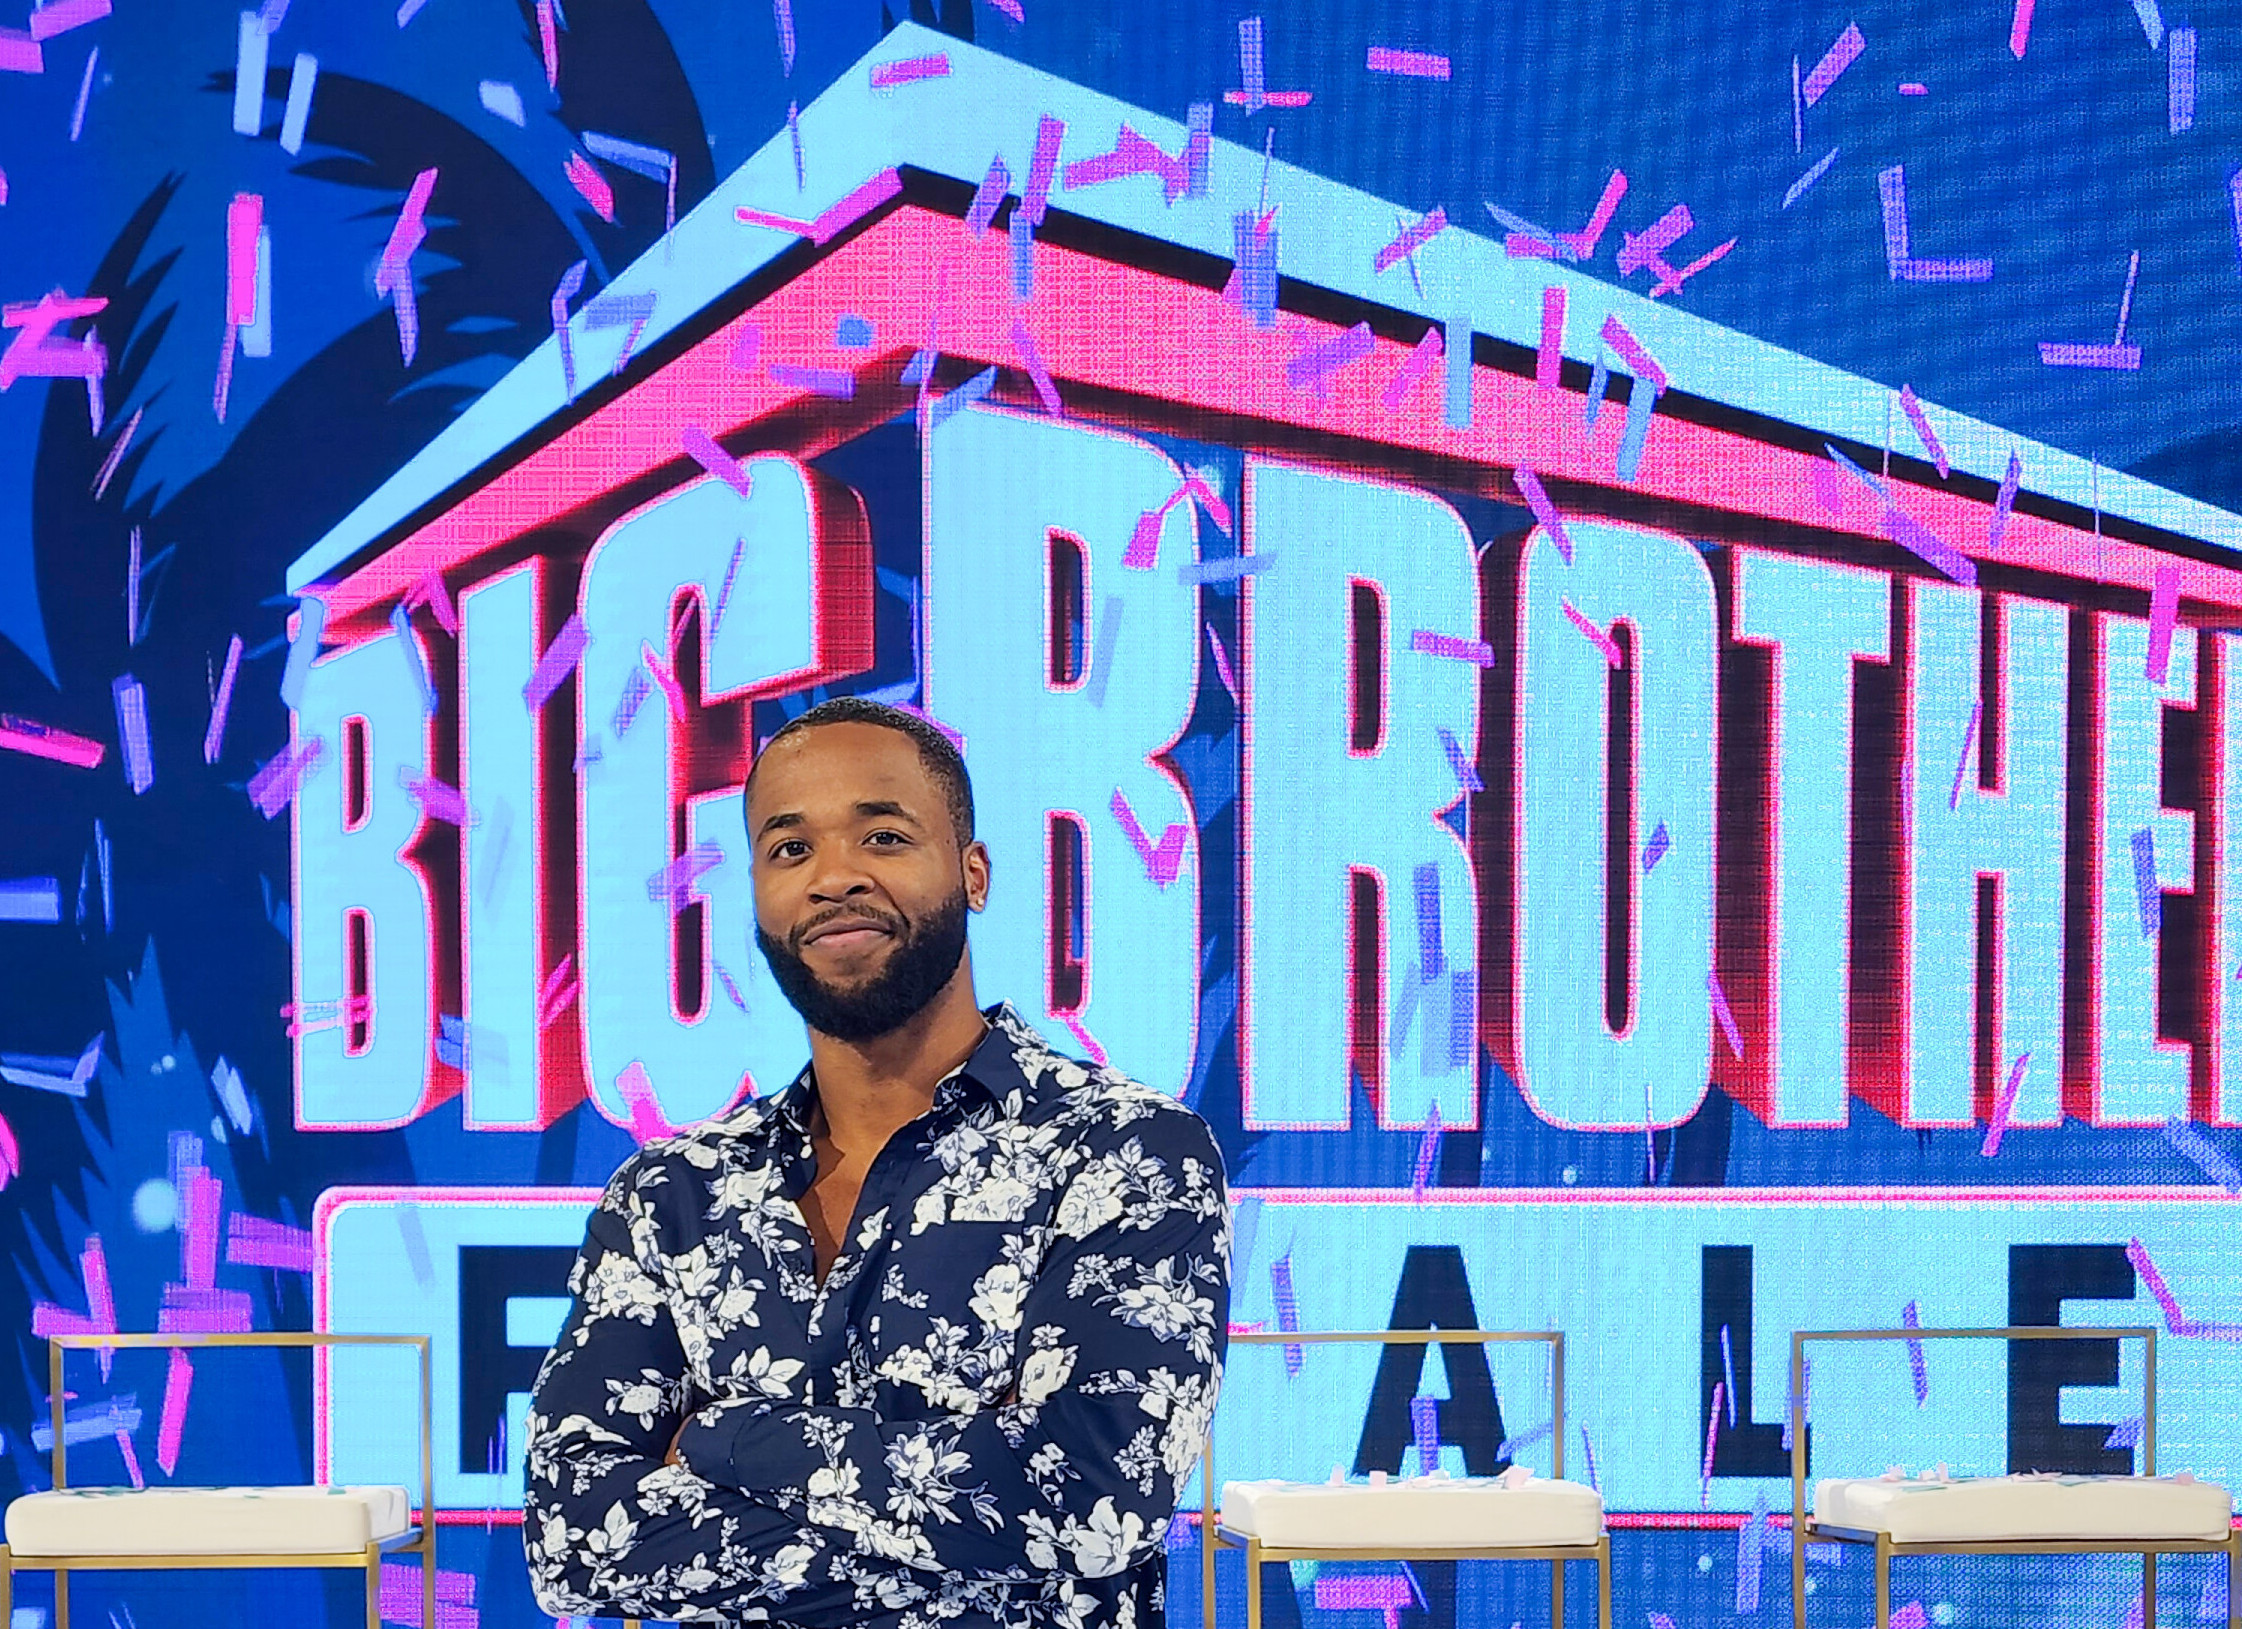 Monte Taylor poses in front of the'Big Brother' finale screen with his arms crossed.